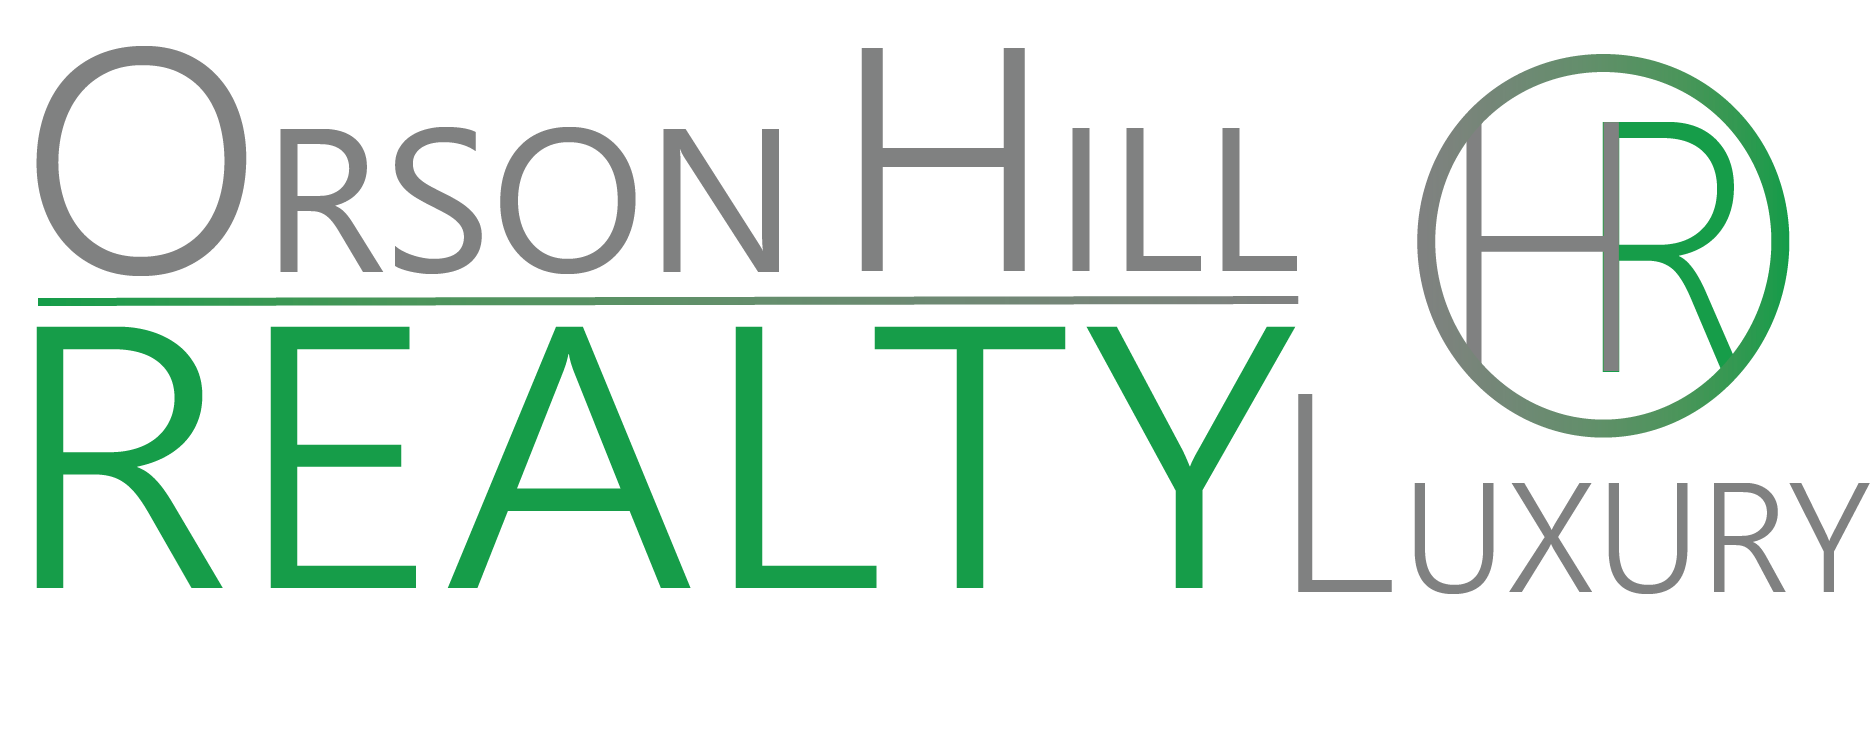 Orson Hill Realty Luxury